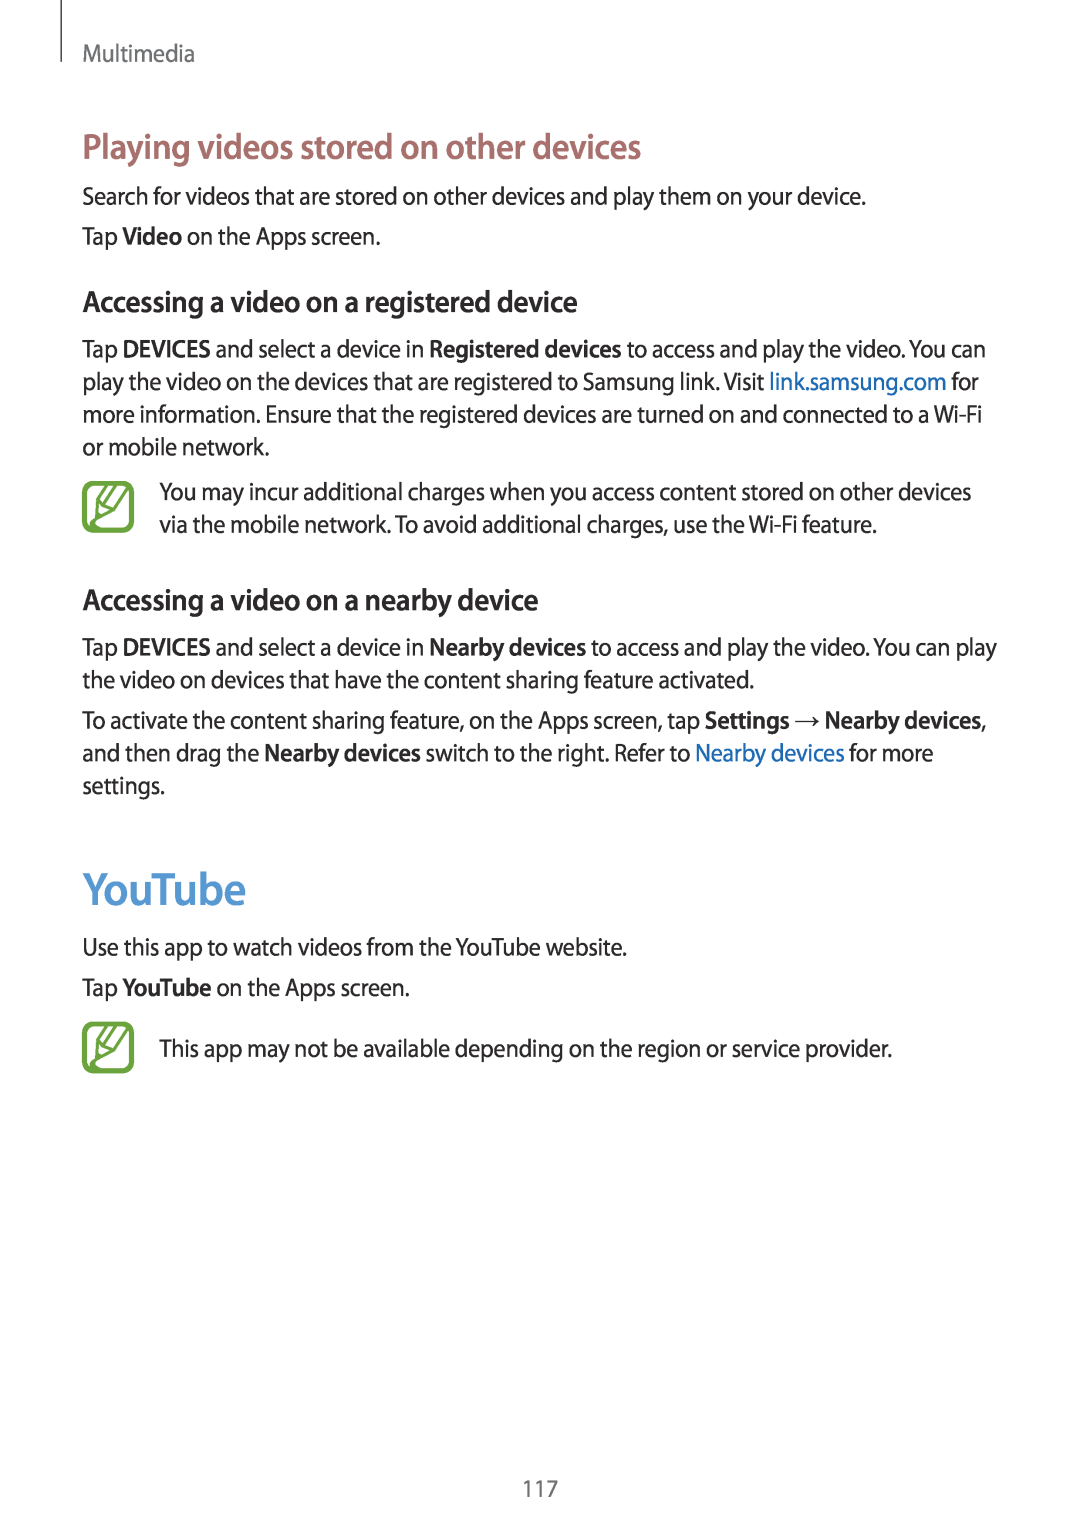 Samsung SM-G901FZKAVD2 manual YouTube, Playing videos stored on other devices, Accessing a video on a registered device 